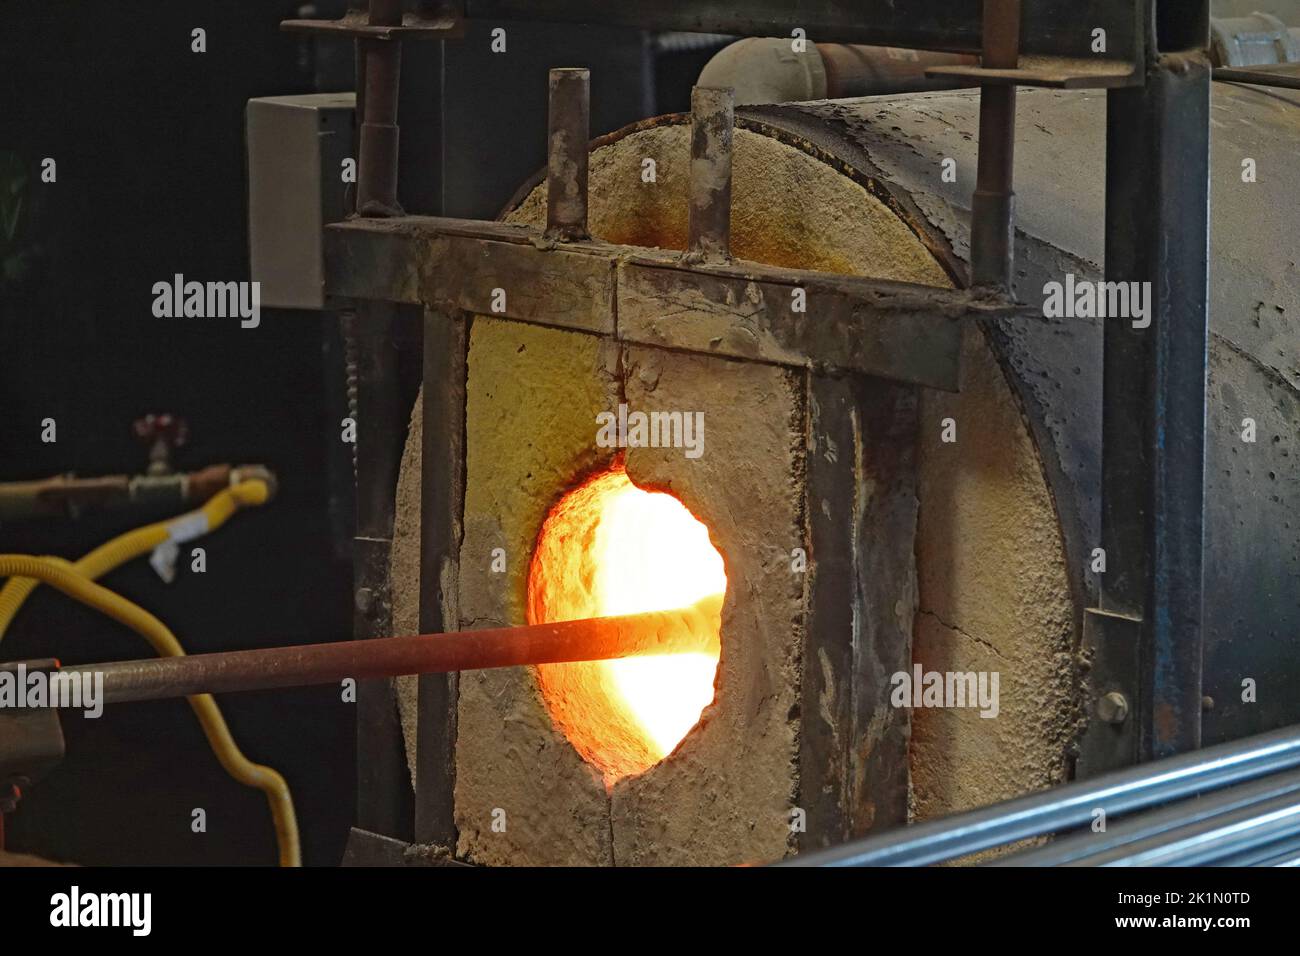 A glass blowing furnace in a glass blowing studio in the small town of Seal Rock, Oregon. Stock Photo